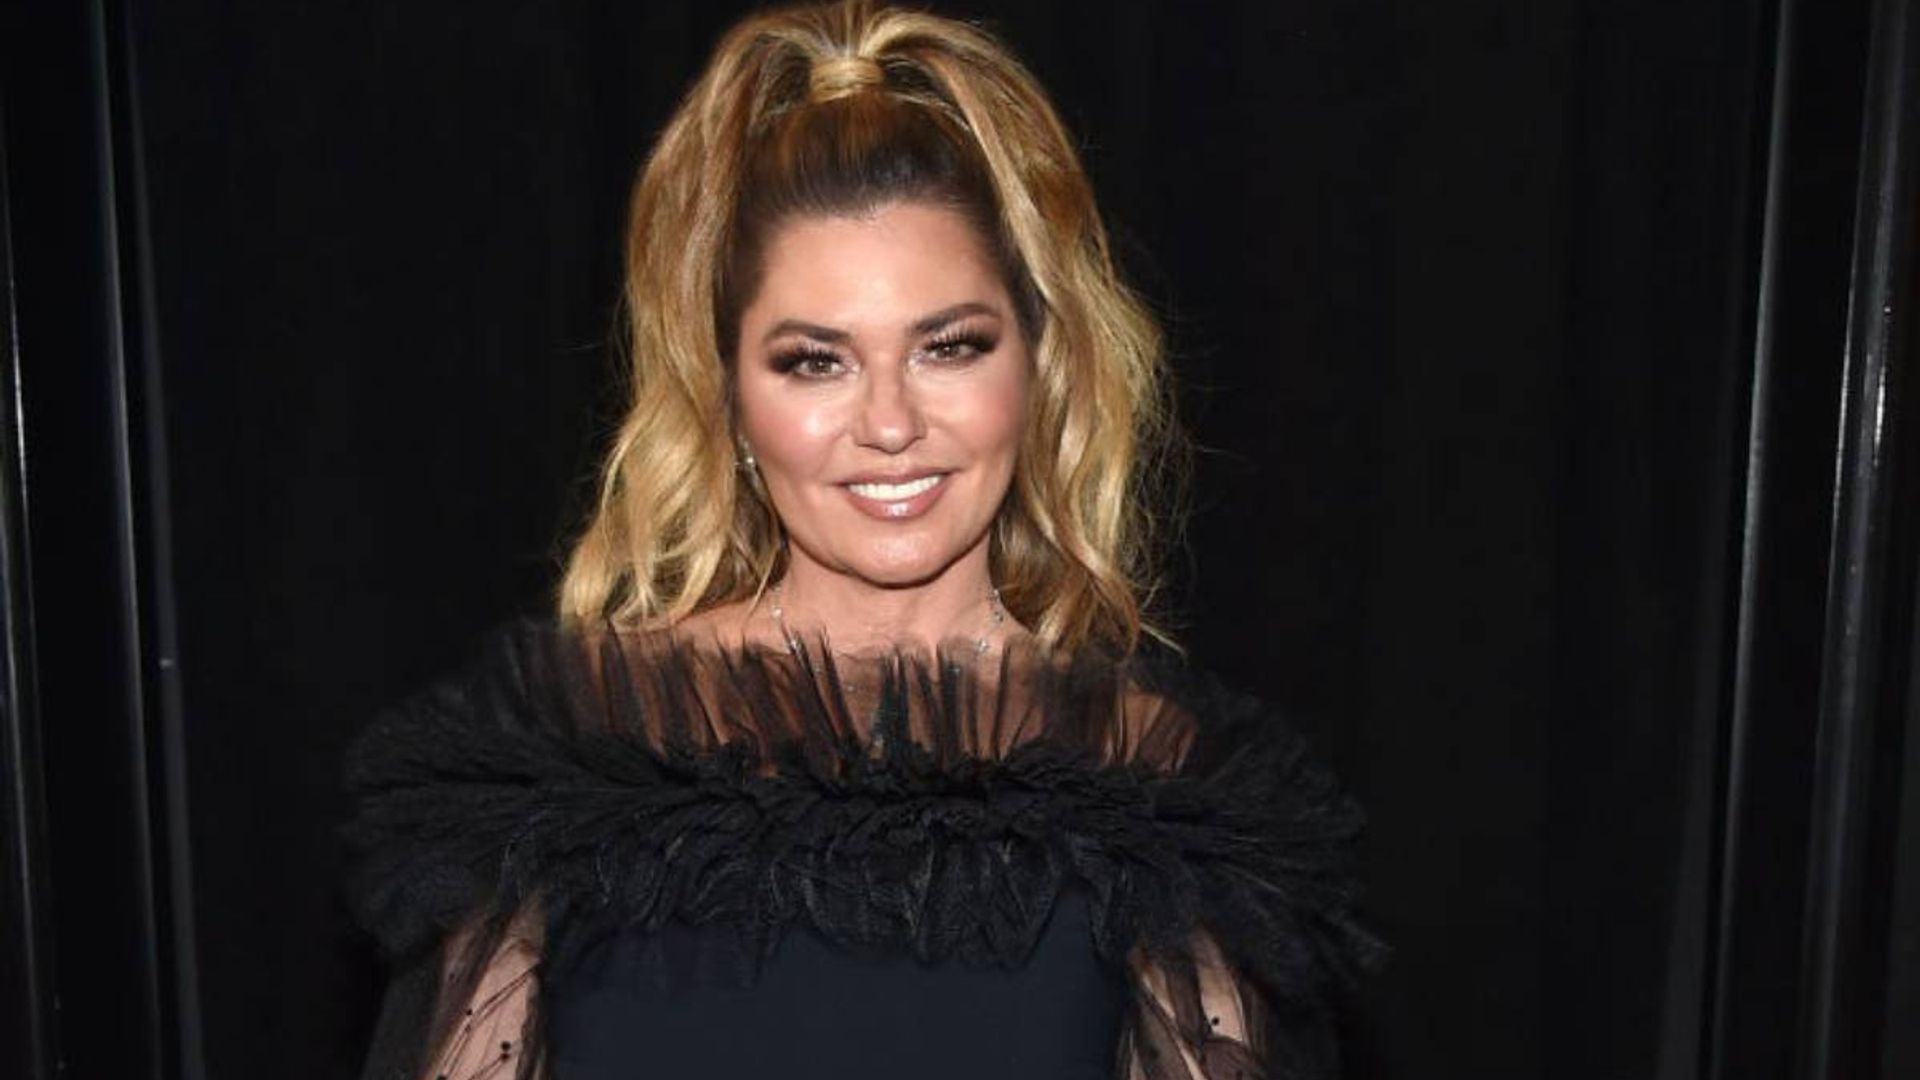 Shania Twain's appearance is so unexpected in new photo HELLO!